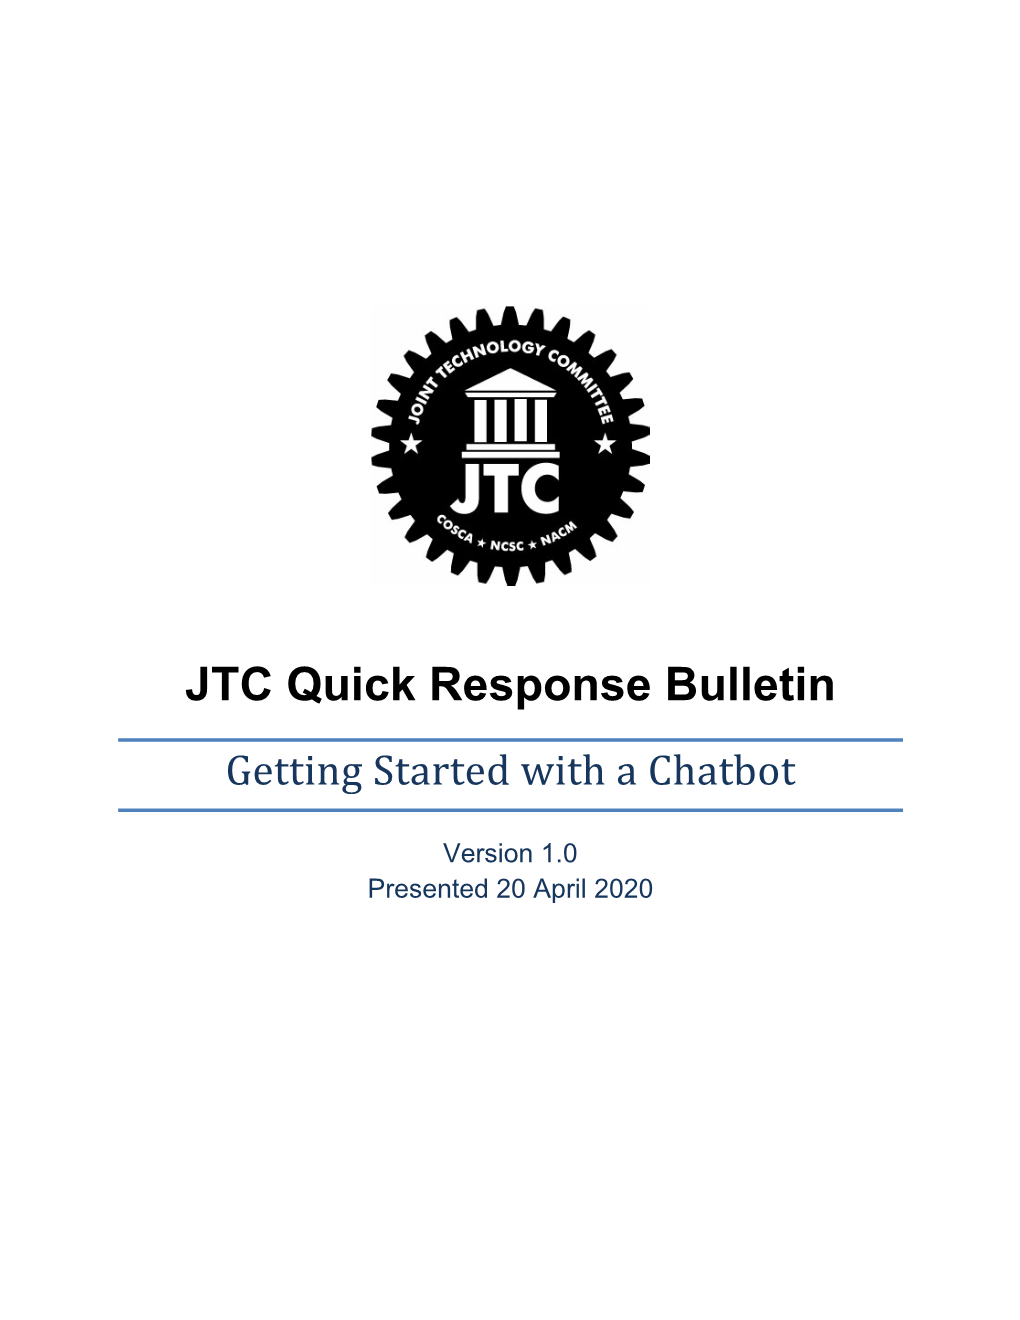 Getting Started with a Chatbot